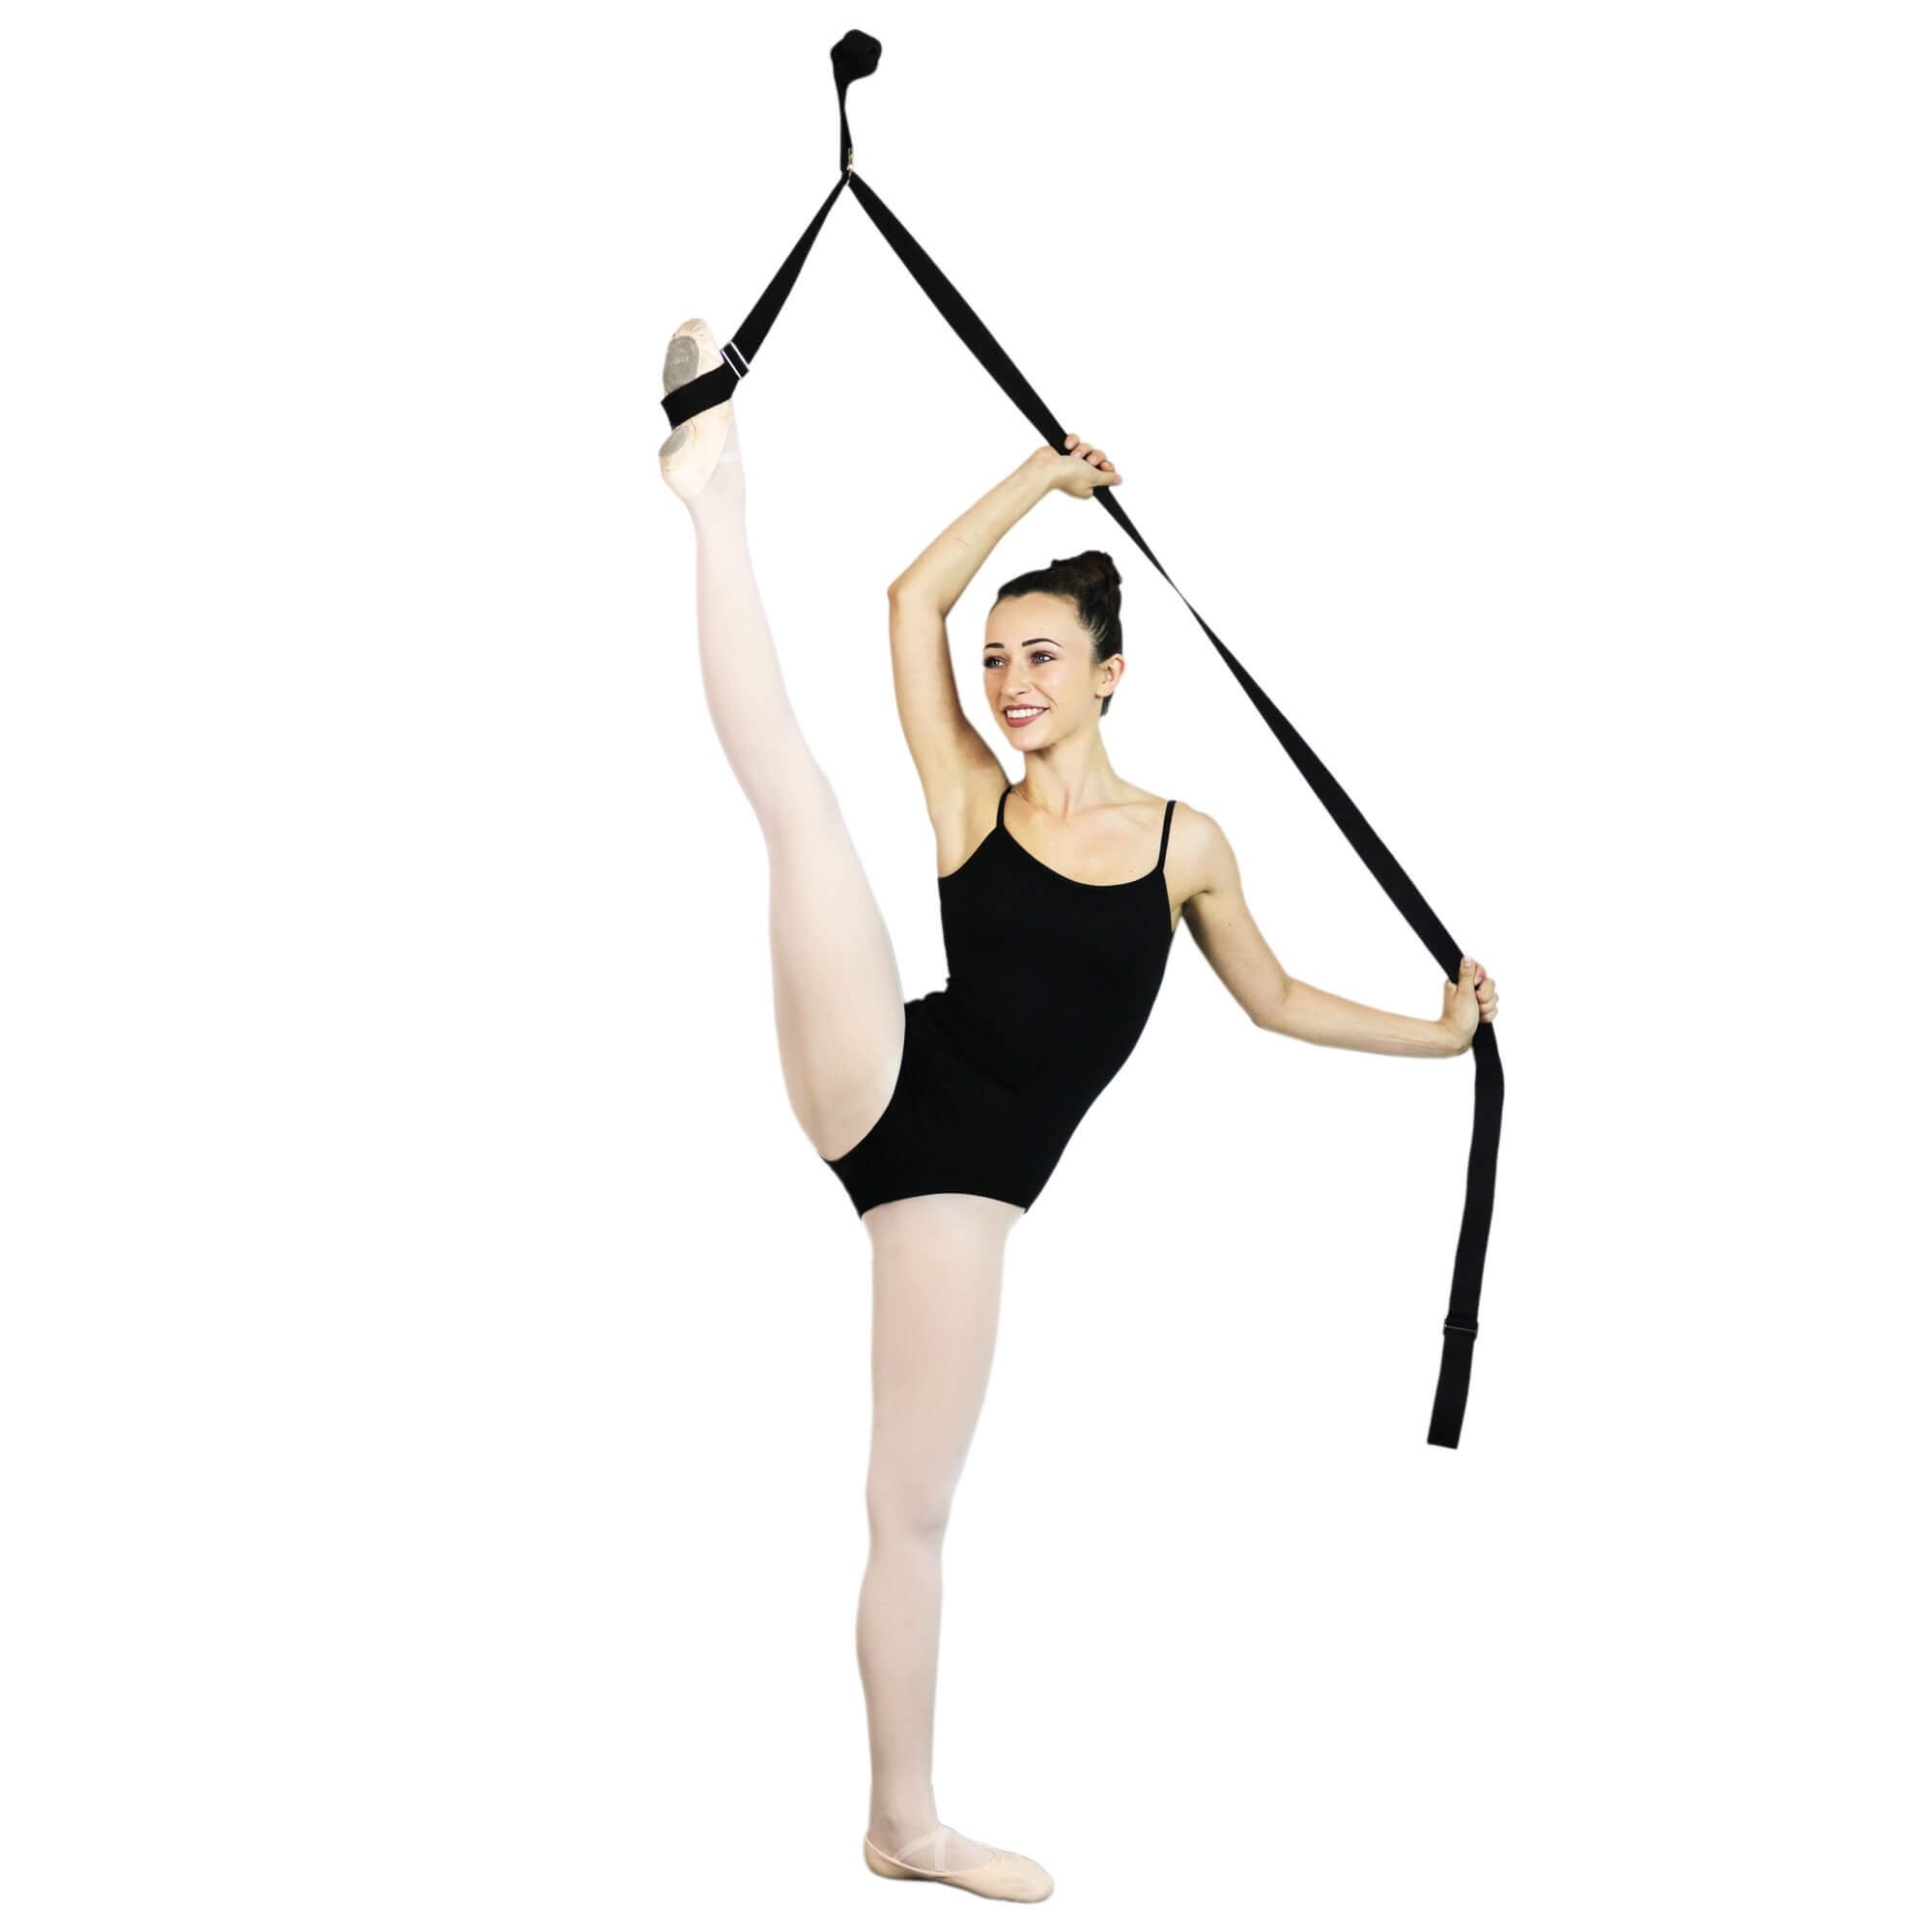 Danzcue Ballet Dance Stretch Band - Click Image to Close